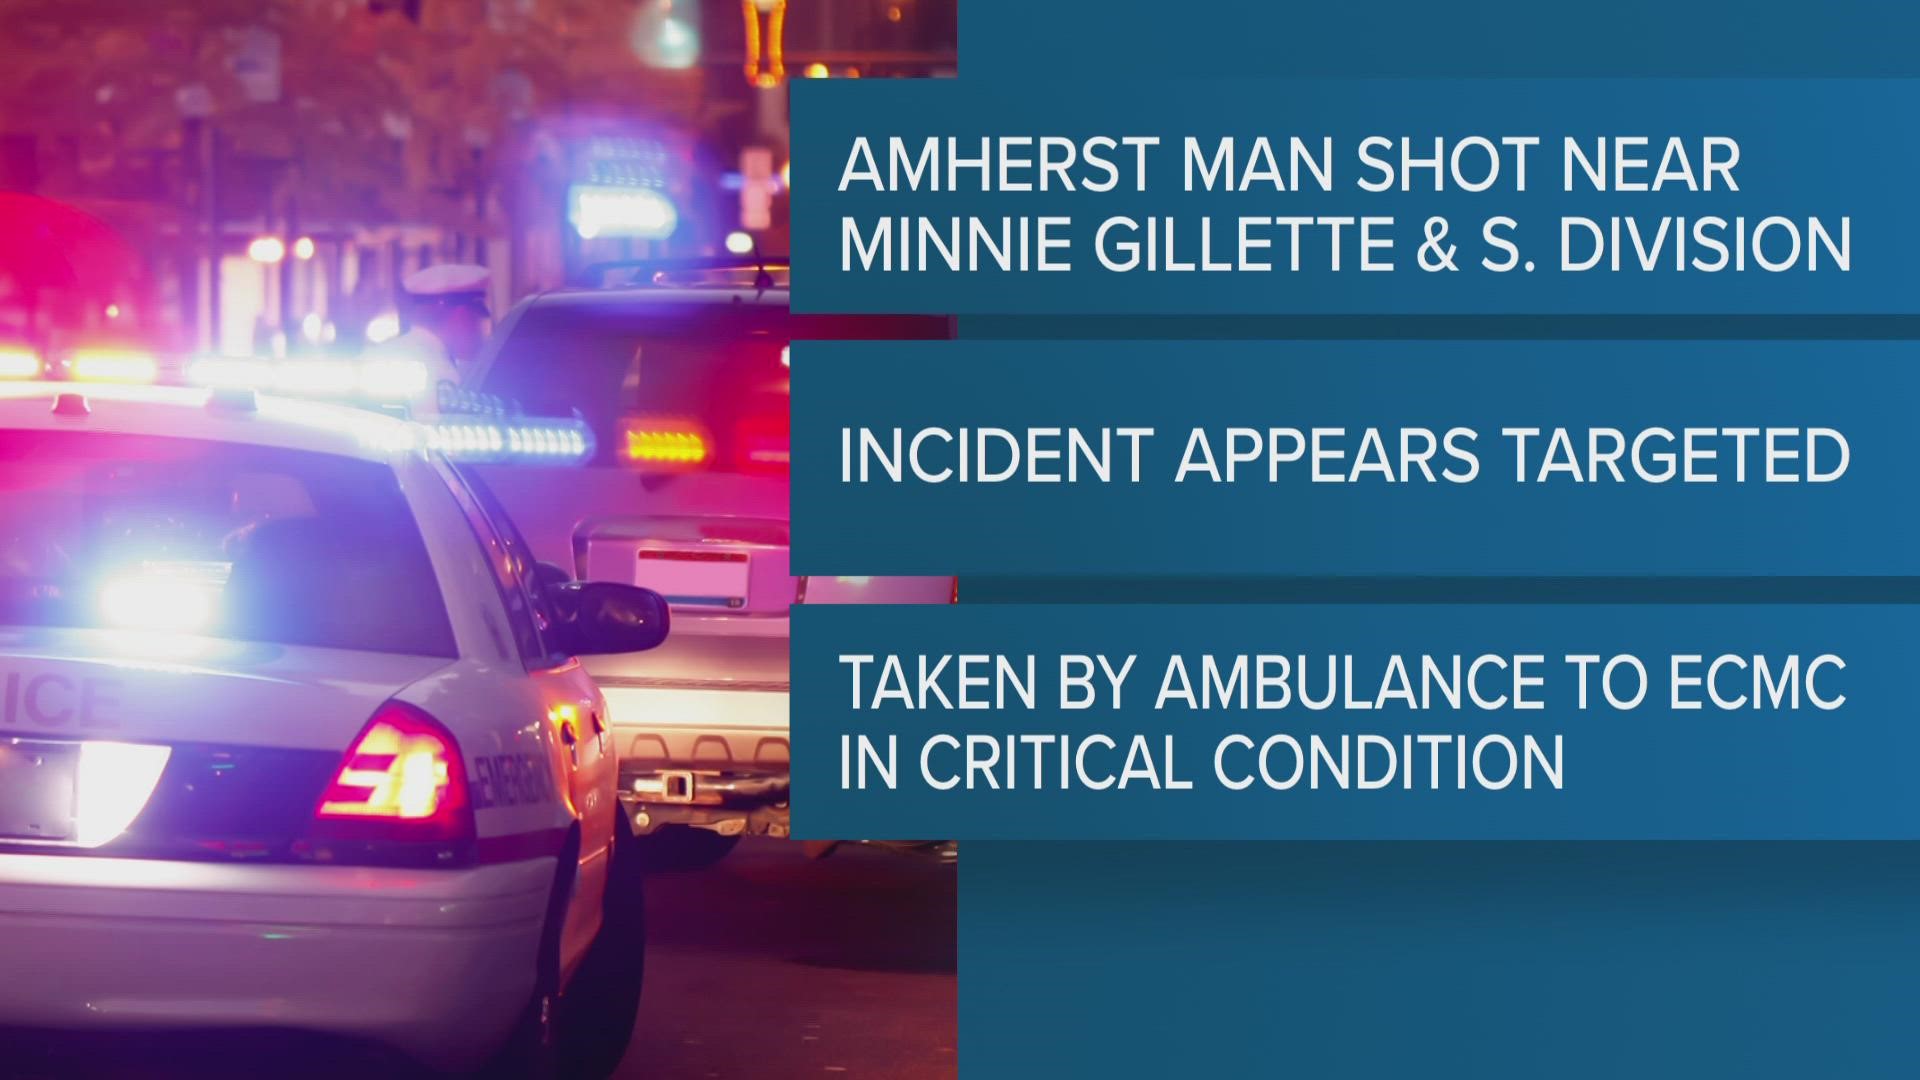 DETECTIVES SAY A 39-YEAR-OLD MAN FROM AMHERST WAS SHOT MULTIPLE TIMES... IN WHAT APPEARS TO BE A TARGETED ATTACK.